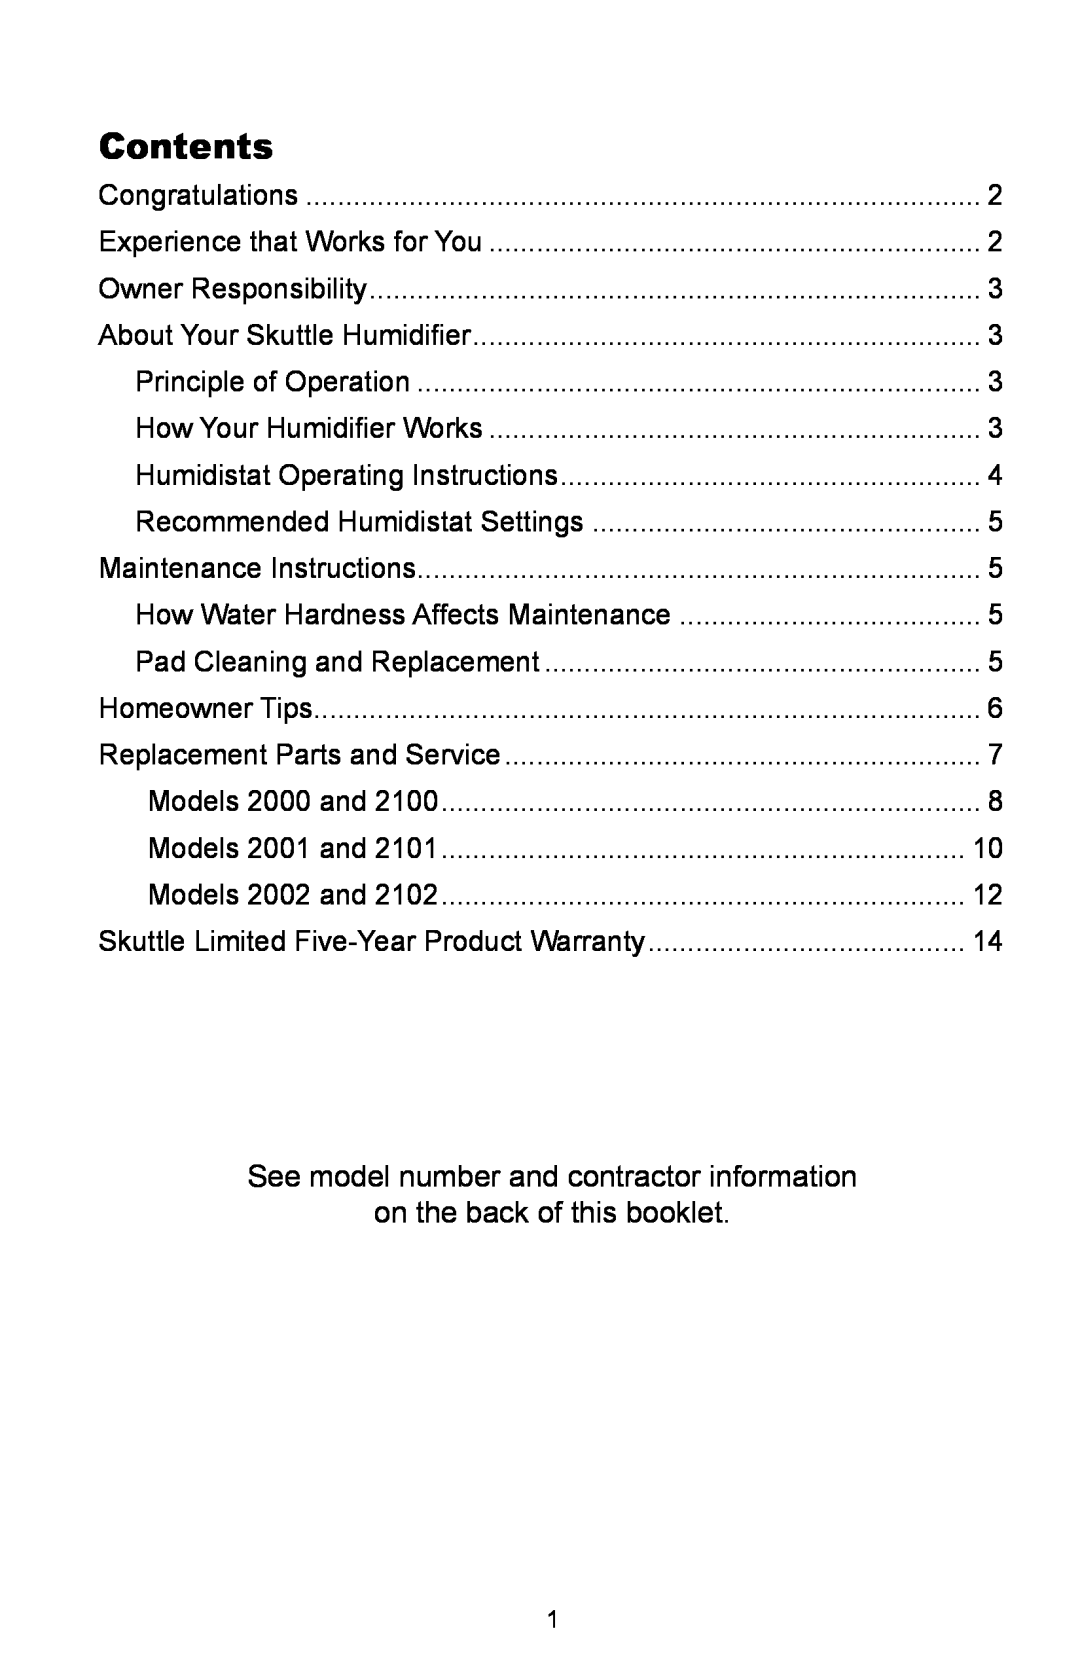 Skuttle Indoor Air Quality Products 2102, 2100 owner manual Contents, See model number and contractor information 